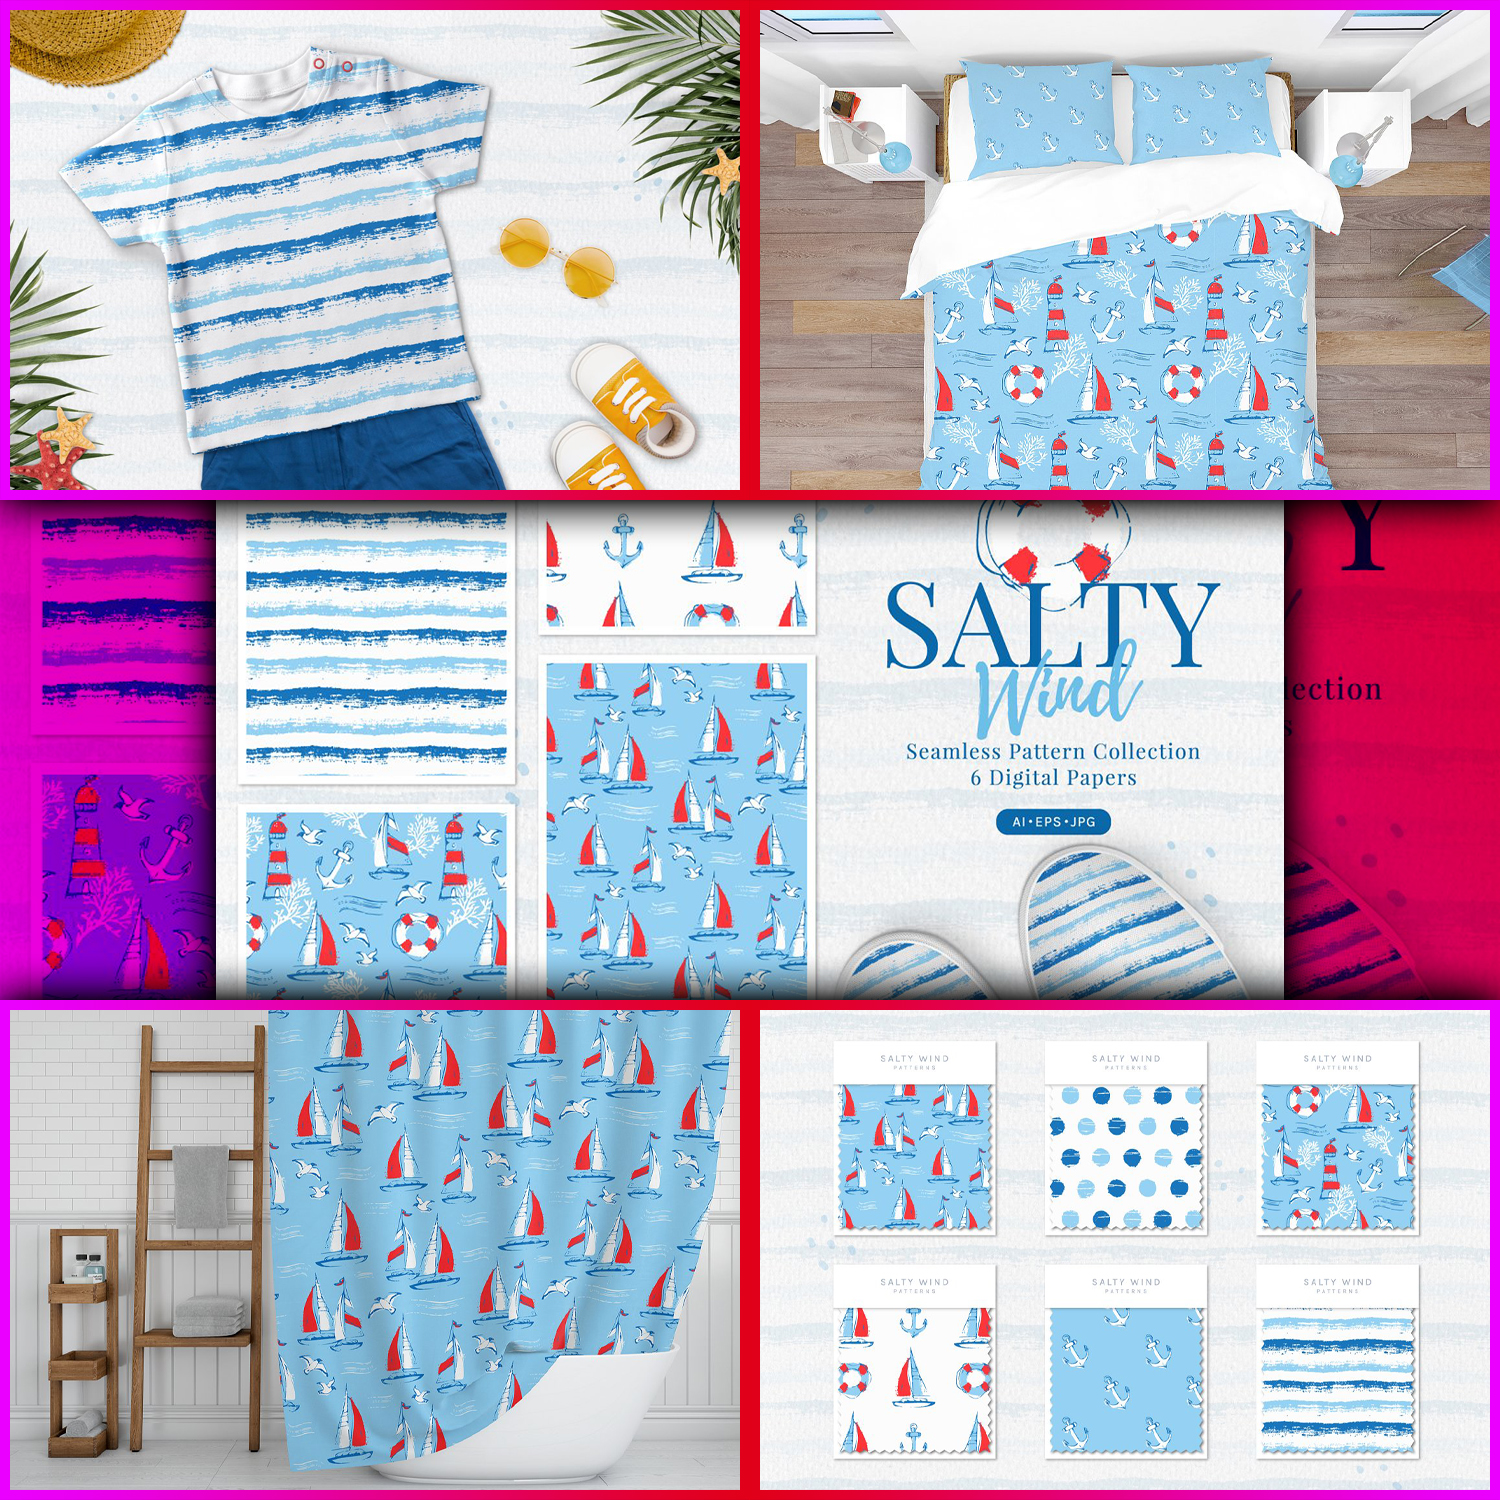 Images preview salty wind patterns collection.